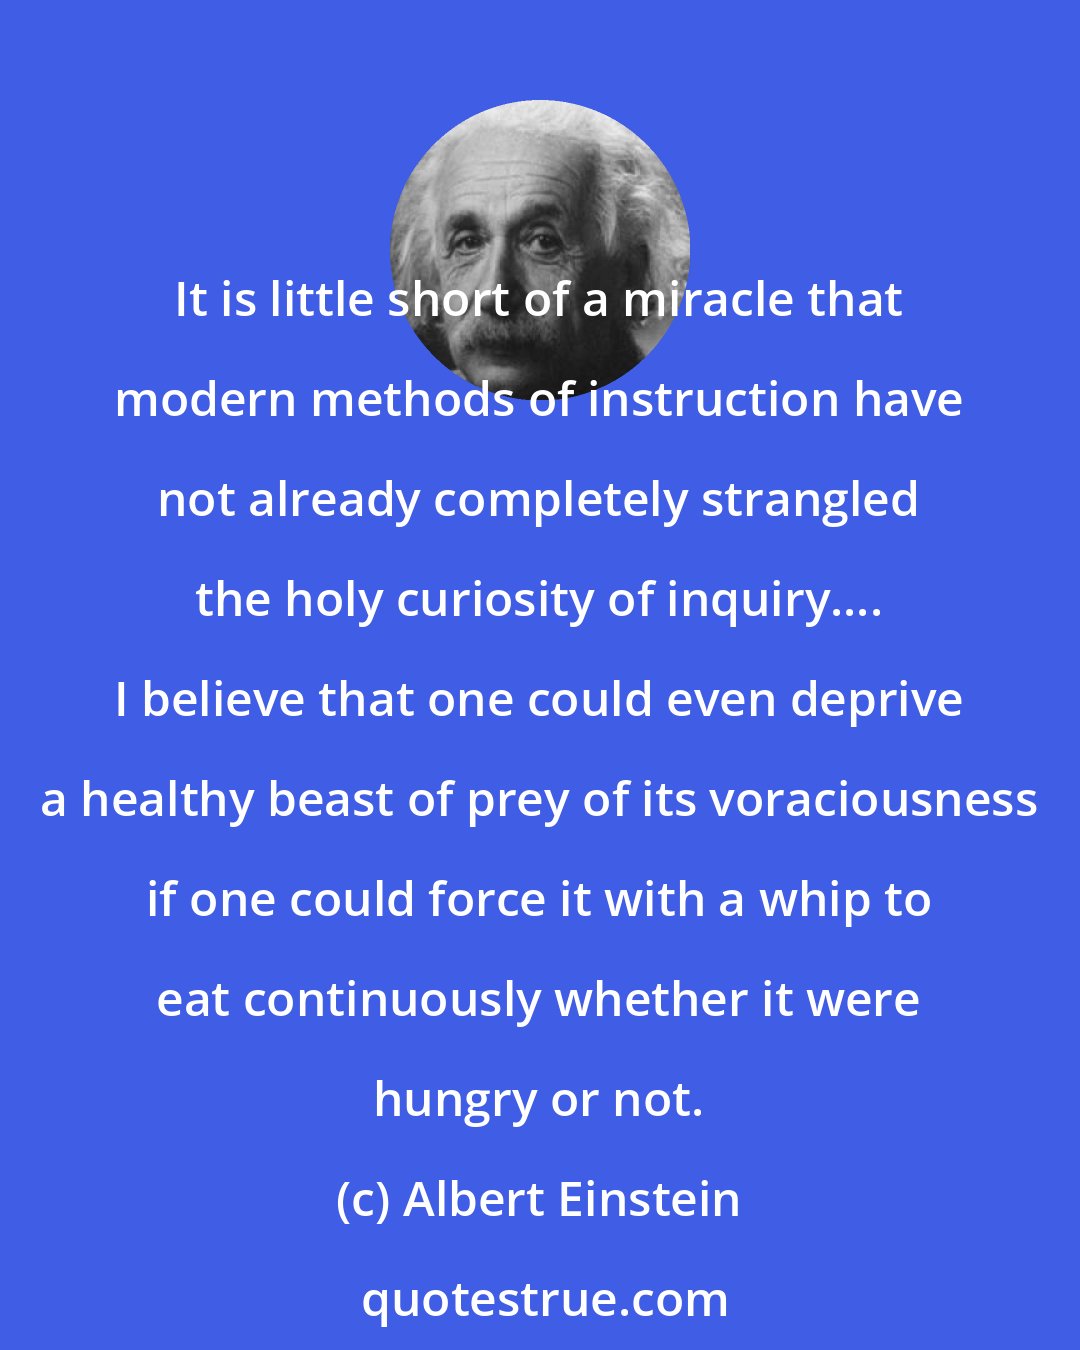 Albert Einstein: It is little short of a miracle that modern methods of instruction have not already completely strangled the holy curiosity of inquiry.... I believe that one could even deprive a healthy beast of prey of its voraciousness if one could force it with a whip to eat continuously whether it were hungry or not.